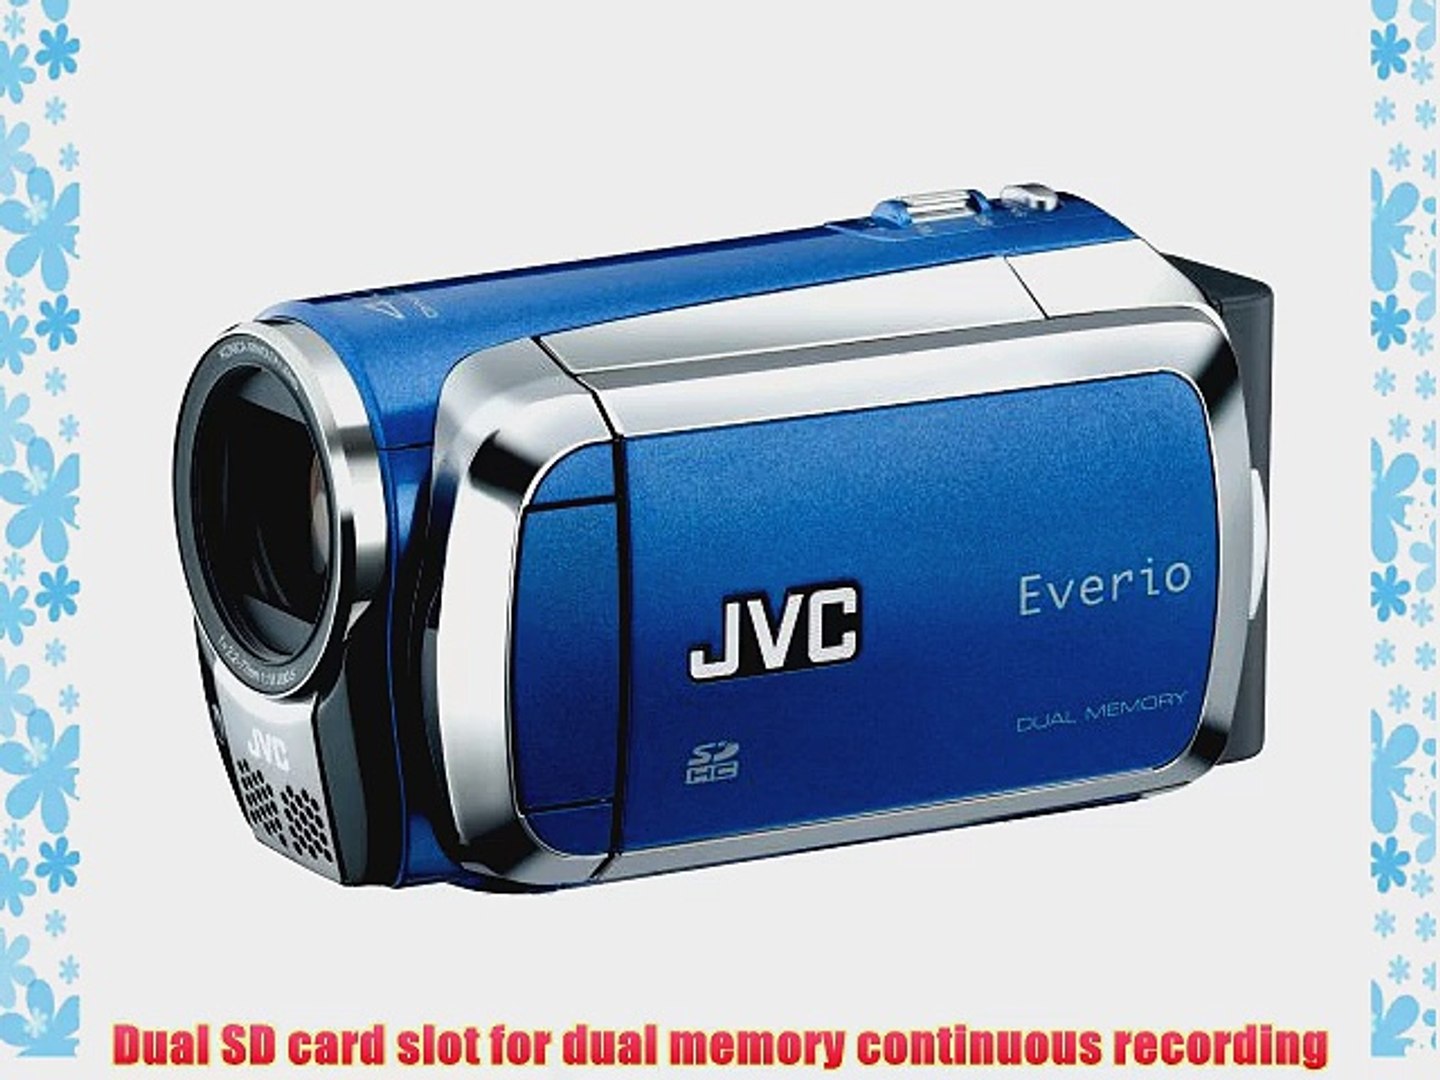 red JVC GZ-MG330 Camcorder